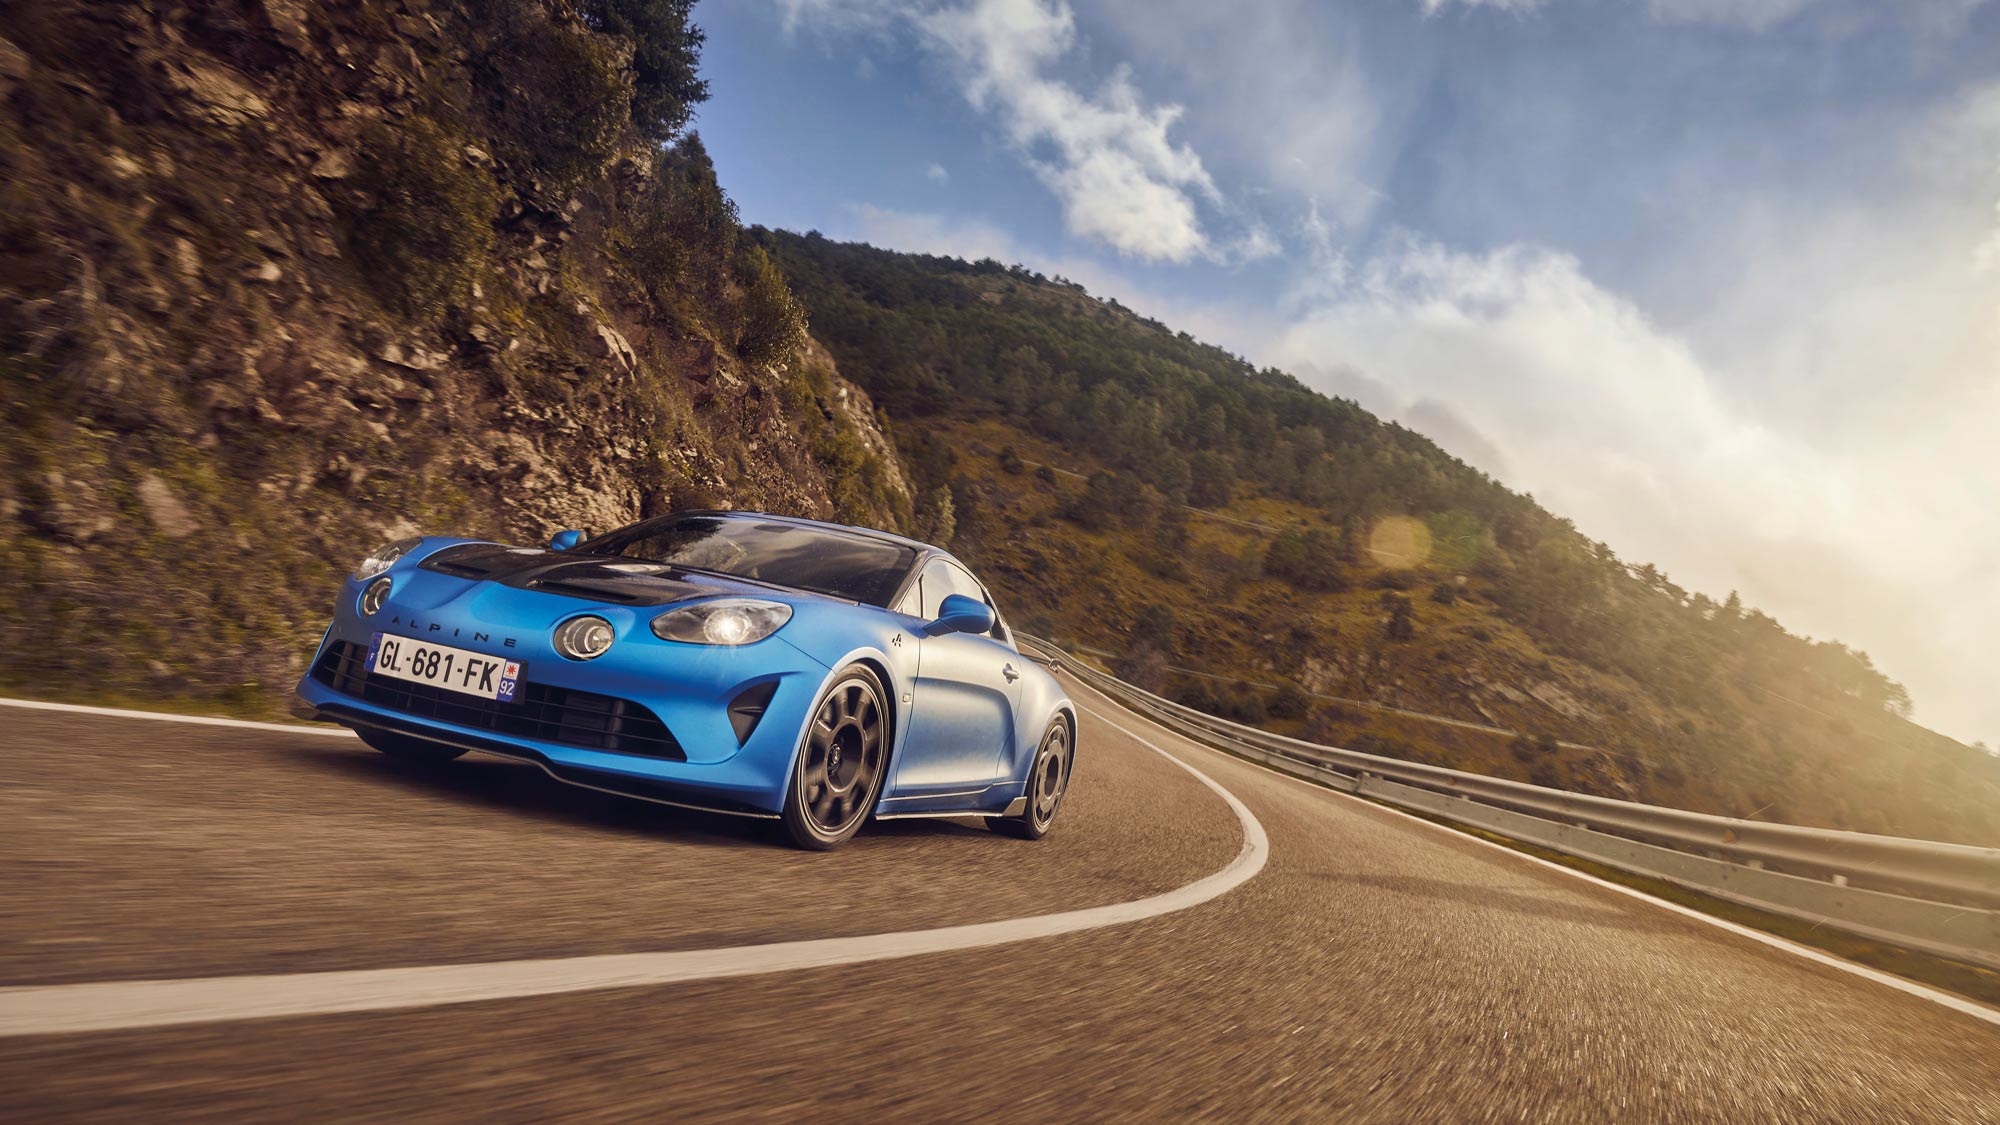 The Lifted Alpine A110 SportsX Is a Crossover We Actually Want